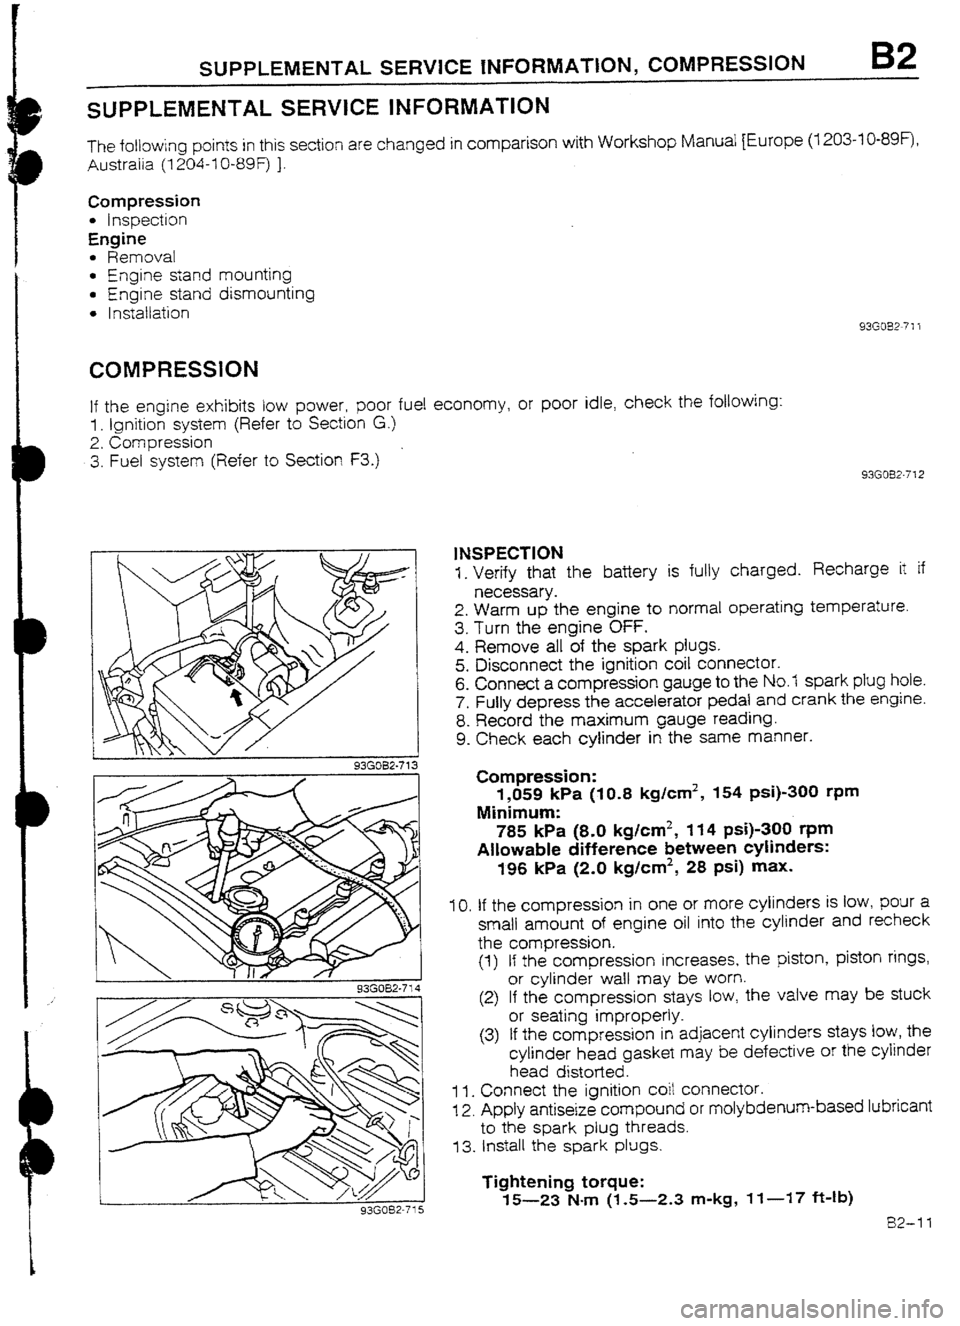 MAZDA 232 1990  Workshop Manual Suplement D 
D 
SUPPLEMENTAL SERVICE iNFORMATION, COMPRESSION 82 
SUPPLEMENTAL SERVICE INFORMATION 
The following points in this section are changed in comparison with Workshop Manual [Europe (7 203~IO-899, 
Au